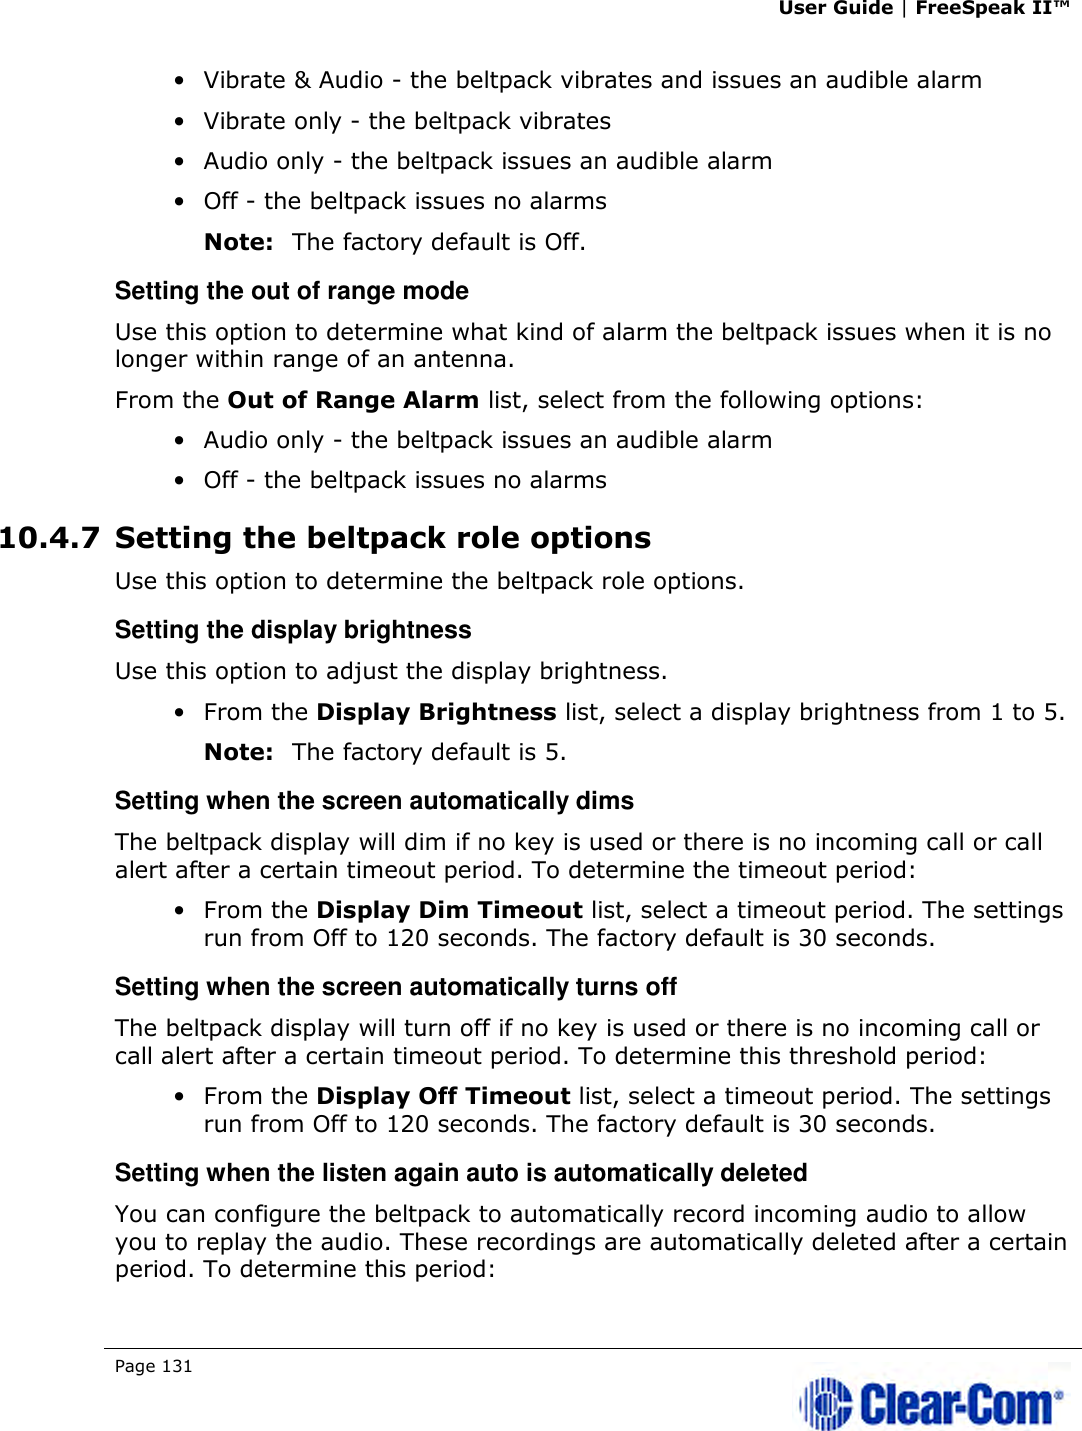 User Guide | FreeSpeak II™  Page 131   • Vibrate &amp; Audio - the beltpack vibrates and issues an audible alarm • Vibrate only - the beltpack vibrates • Audio only - the beltpack issues an audible alarm • Off - the beltpack issues no alarms Note: The factory default is Off. Setting the out of range mode Use this option to determine what kind of alarm the beltpack issues when it is no longer within range of an antenna. From the Out of Range Alarm list, select from the following options: • Audio only - the beltpack issues an audible alarm • Off - the beltpack issues no alarms 10.4.7 Setting the beltpack role options Use this option to determine the beltpack role options. Setting the display brightness Use this option to adjust the display brightness.  • From the Display Brightness list, select a display brightness from 1 to 5. Note: The factory default is 5. Setting when the screen automatically dims The beltpack display will dim if no key is used or there is no incoming call or call alert after a certain timeout period. To determine the timeout period: • From the Display Dim Timeout list, select a timeout period. The settings run from Off to 120 seconds. The factory default is 30 seconds. Setting when the screen automatically turns off The beltpack display will turn off if no key is used or there is no incoming call or call alert after a certain timeout period. To determine this threshold period: • From the Display Off Timeout list, select a timeout period. The settings run from Off to 120 seconds. The factory default is 30 seconds. Setting when the listen again auto is automatically deleted You can configure the beltpack to automatically record incoming audio to allow you to replay the audio. These recordings are automatically deleted after a certain period. To determine this period: 